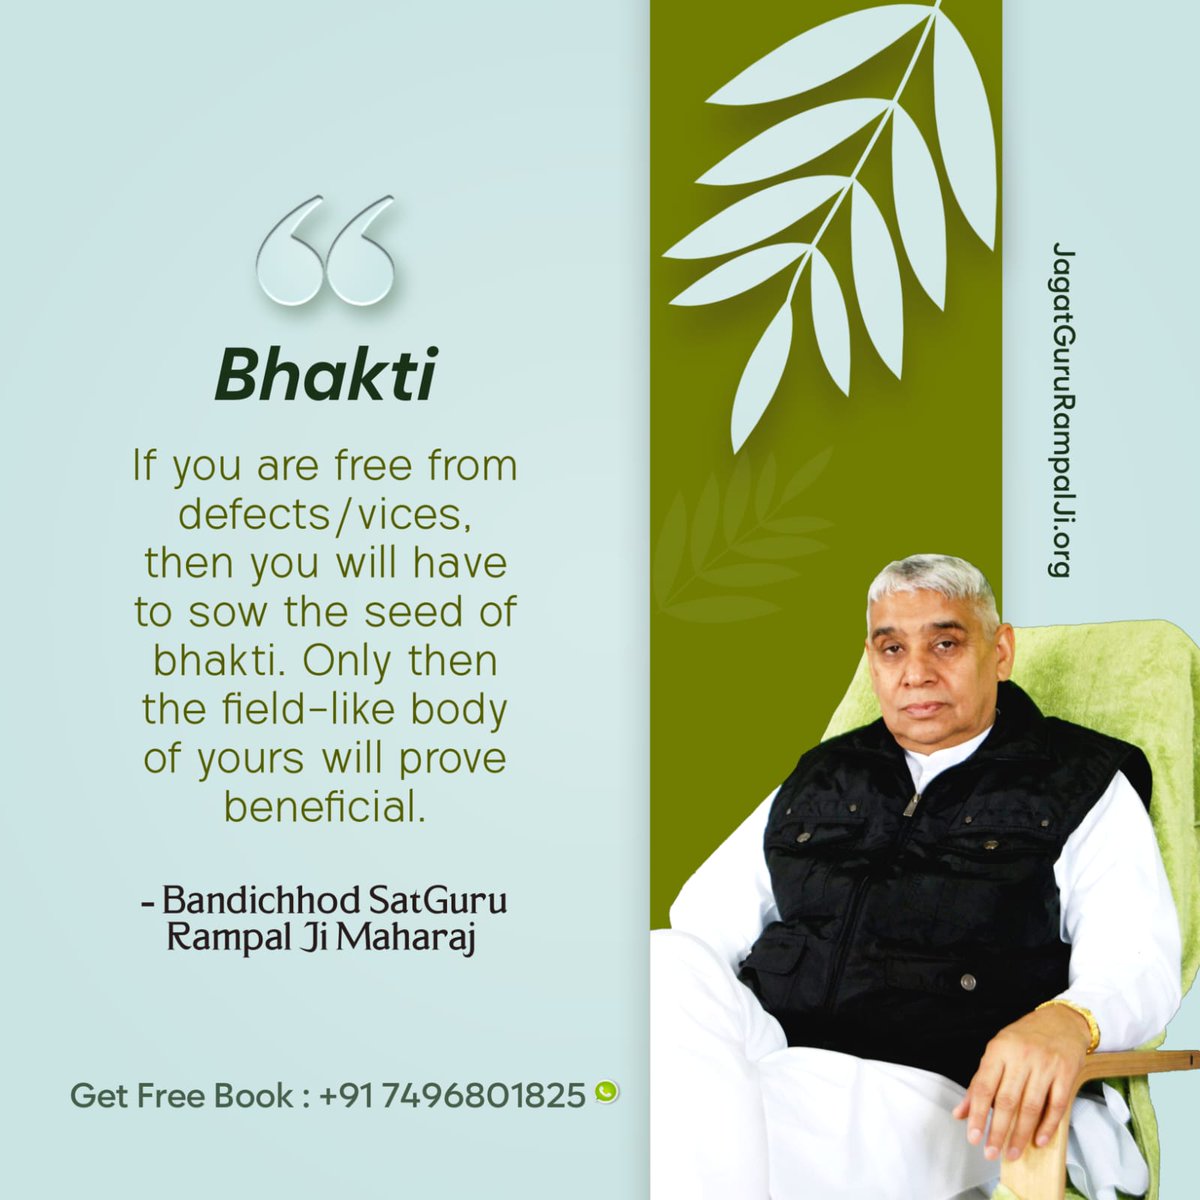 #GodMorningSaturday
Bhakti
If you are free from defects/vices, then you will have to sow the seed of bhakti. Only then the field-like body of yours will prove beneficial.
#SaintRampalJiQuotes